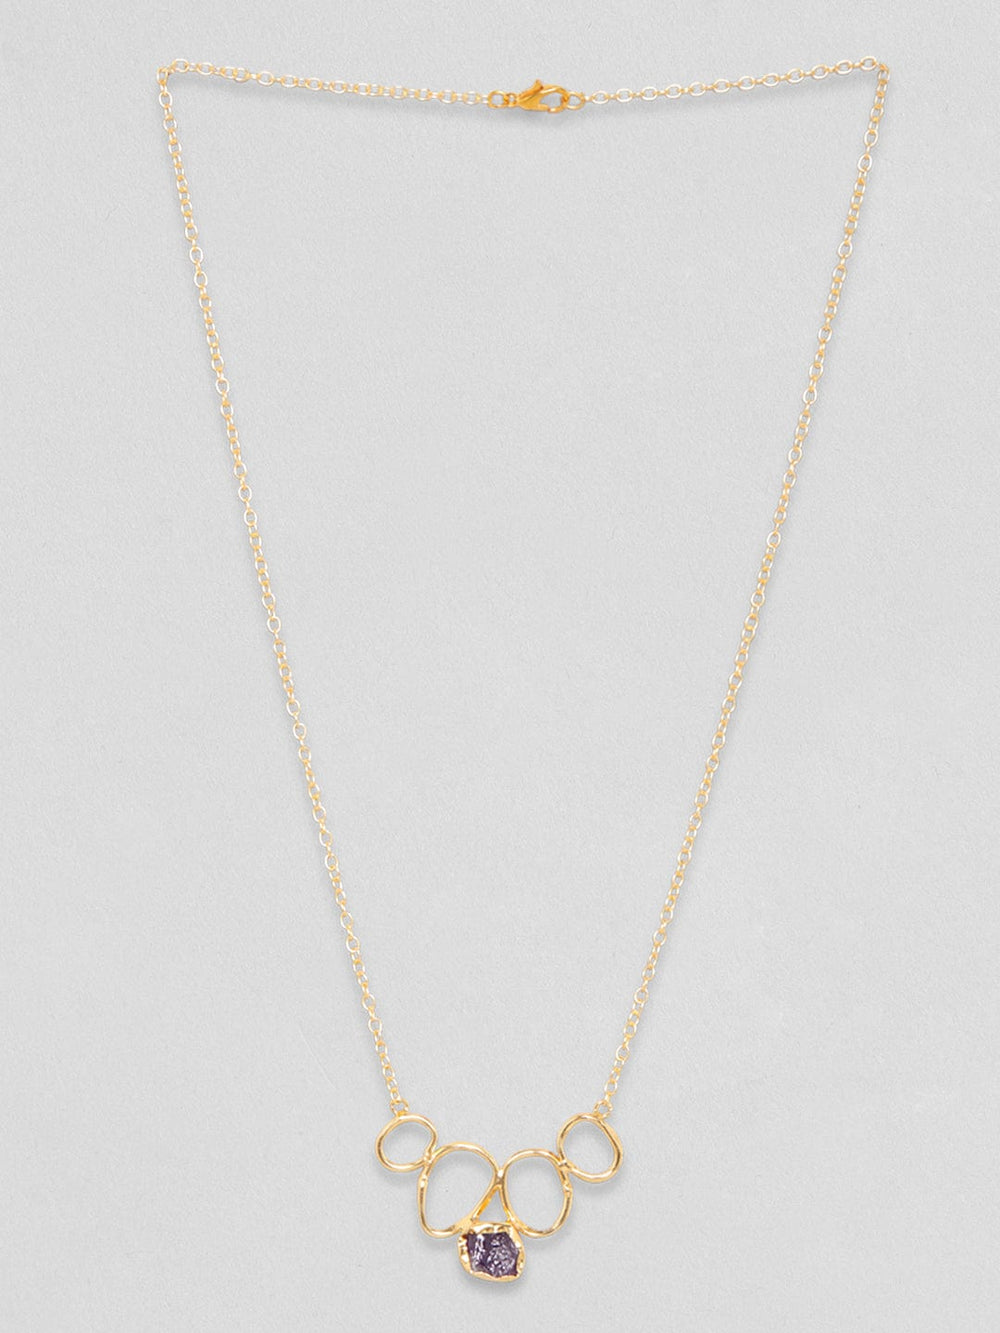 Rubans Voguish 18K Gold Plated On Copper Handcrafted With Raw Stone Setting Minimal Chain Chain & Necklaces